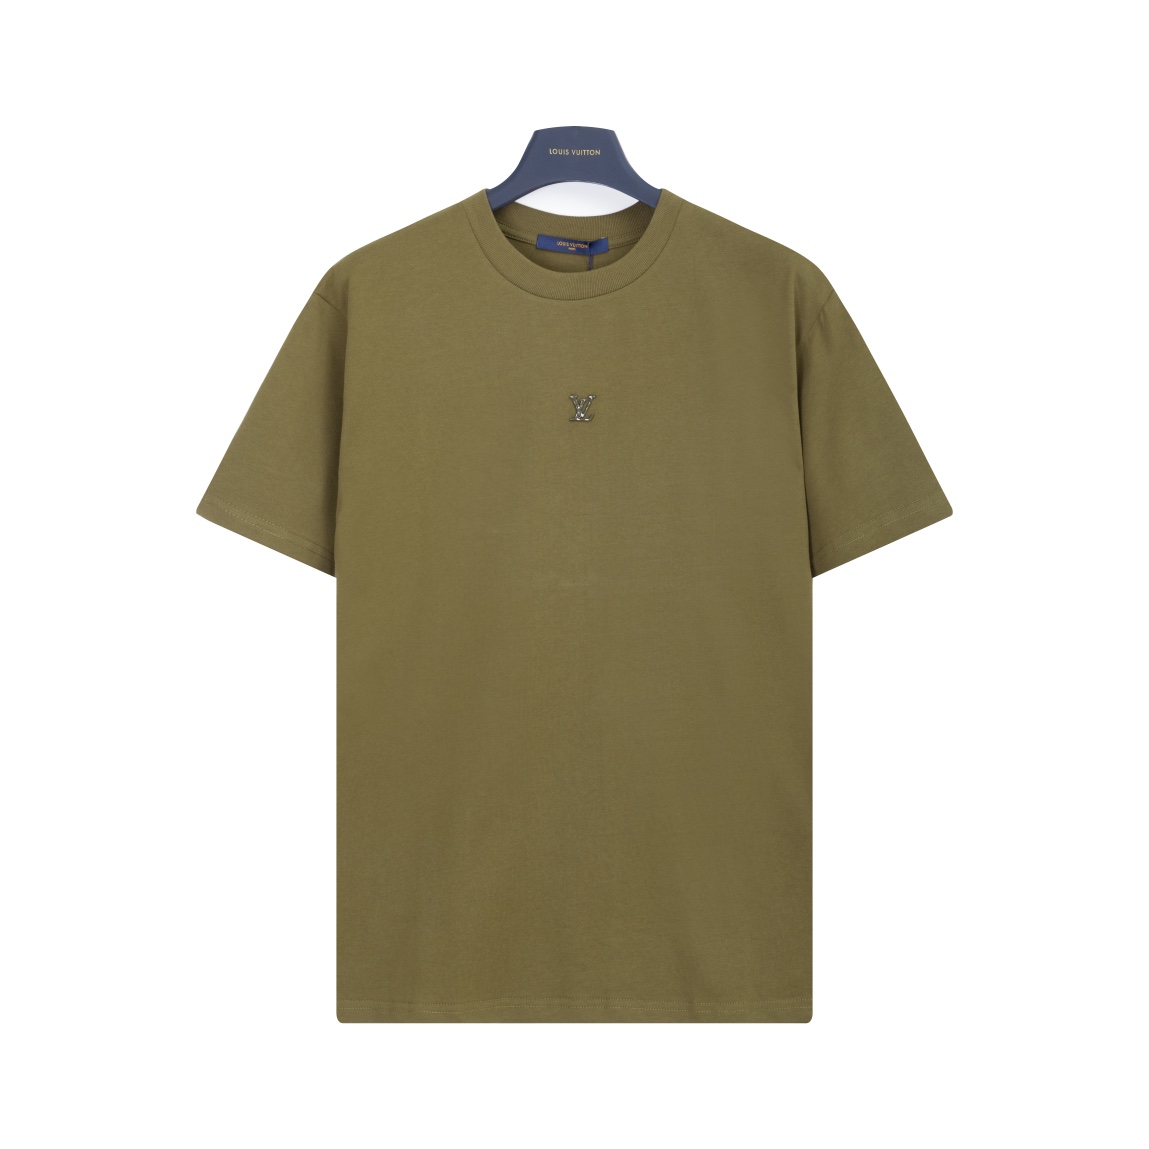 Louis Vuitton Clothing T-Shirt ArmyGreen Green Printing Unisex Cotton Spring/Summer Collection Short Sleeve